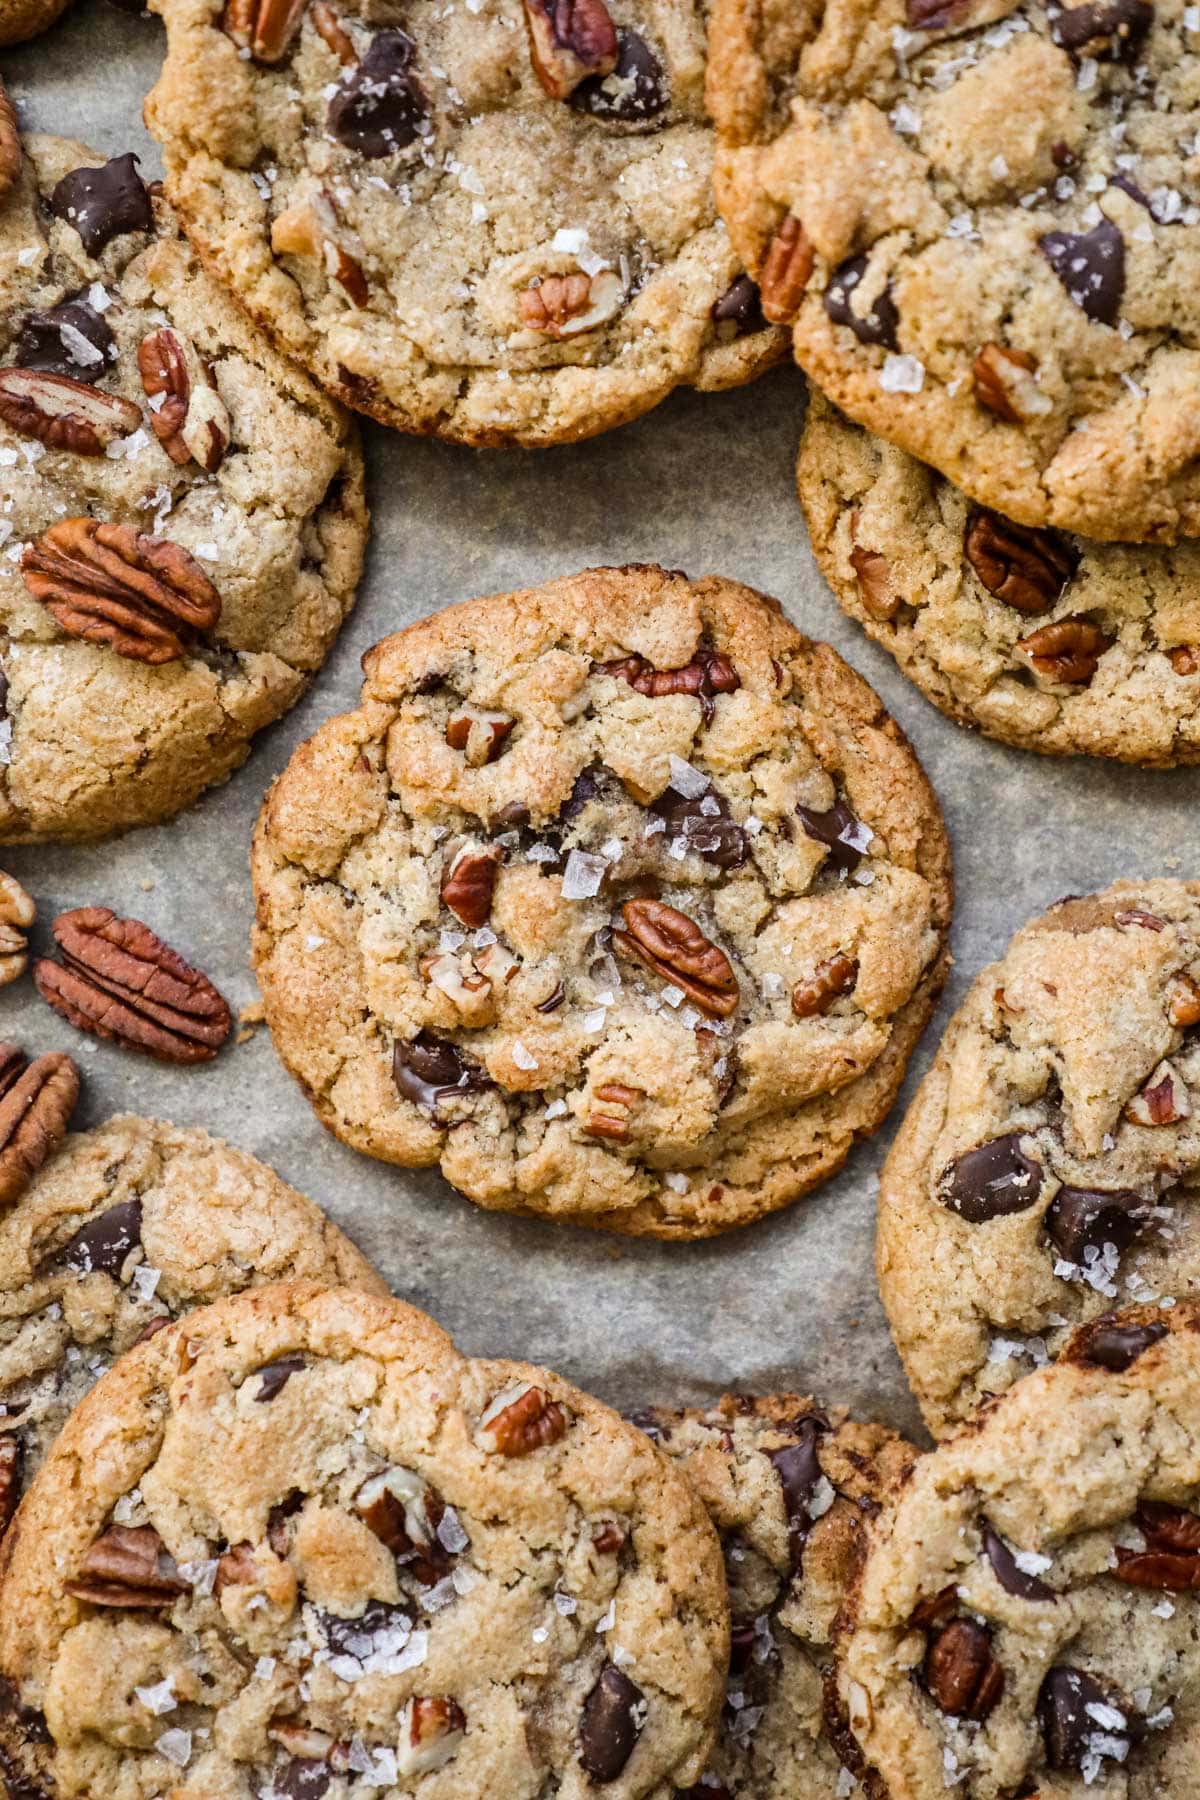 Warm and chewy browned butter pecan chocolate chip cookies with flaky sea salt on a parchment paper-lined baking sheet.